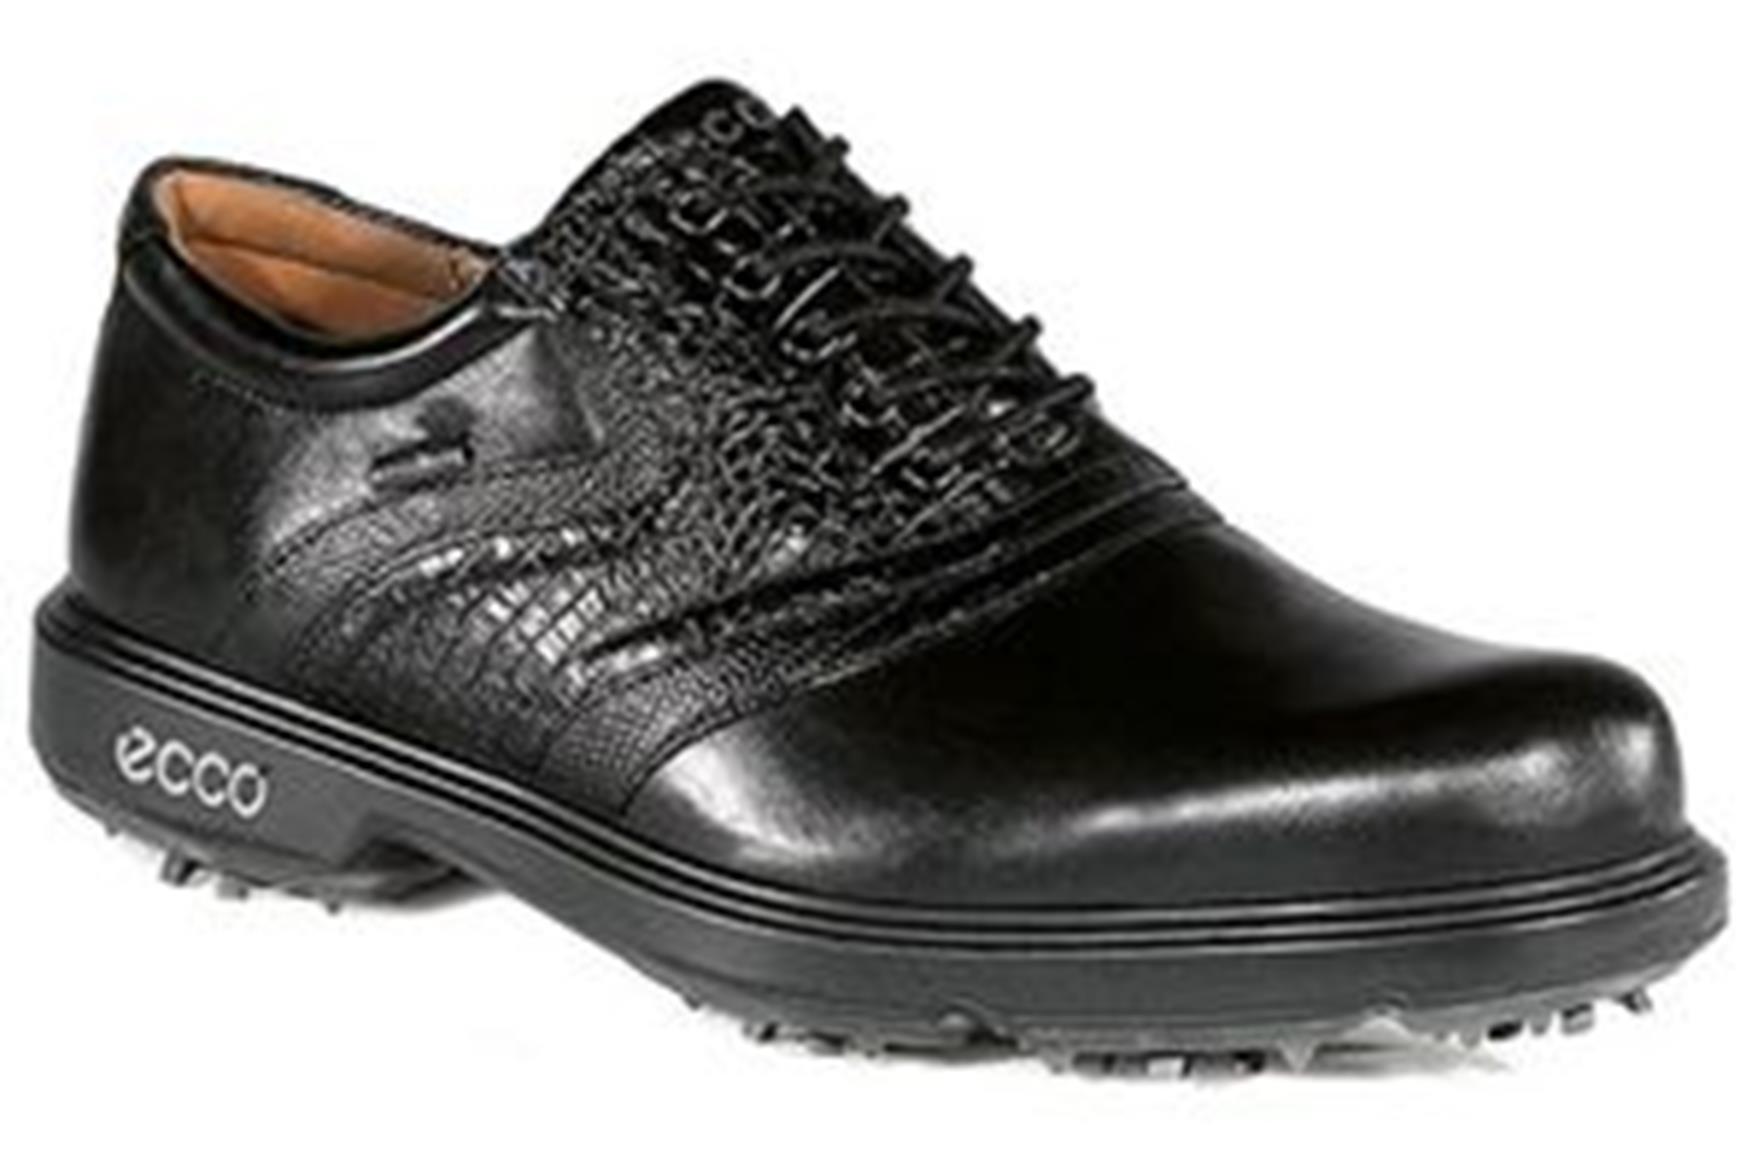 Ecco Classic Golf Shoes Review 